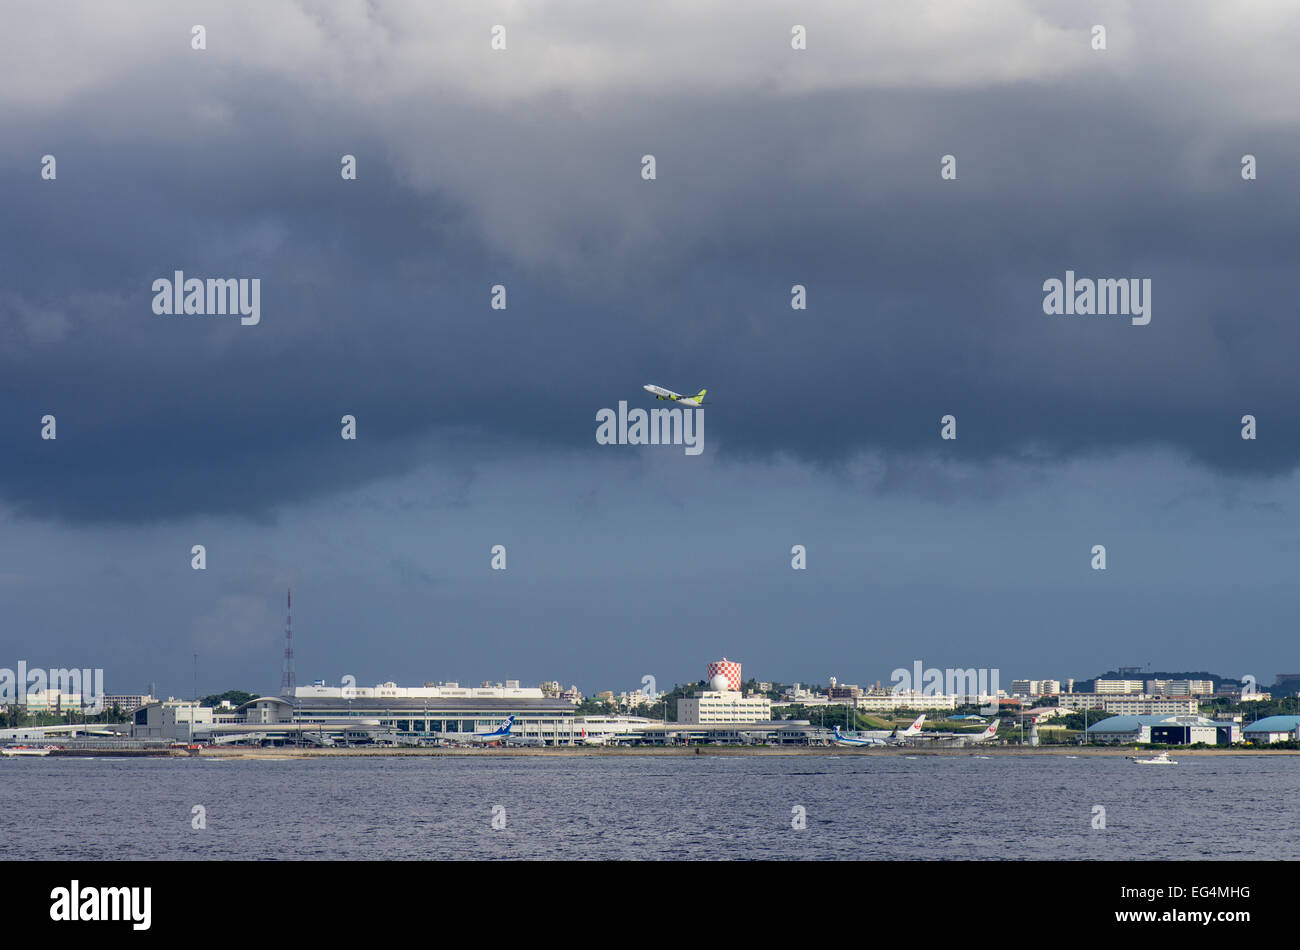 Naha Airport as seen from sea with a departing Solarseed plane during approaching typhoon, Naha, Okinawa, Japan Stock Photo